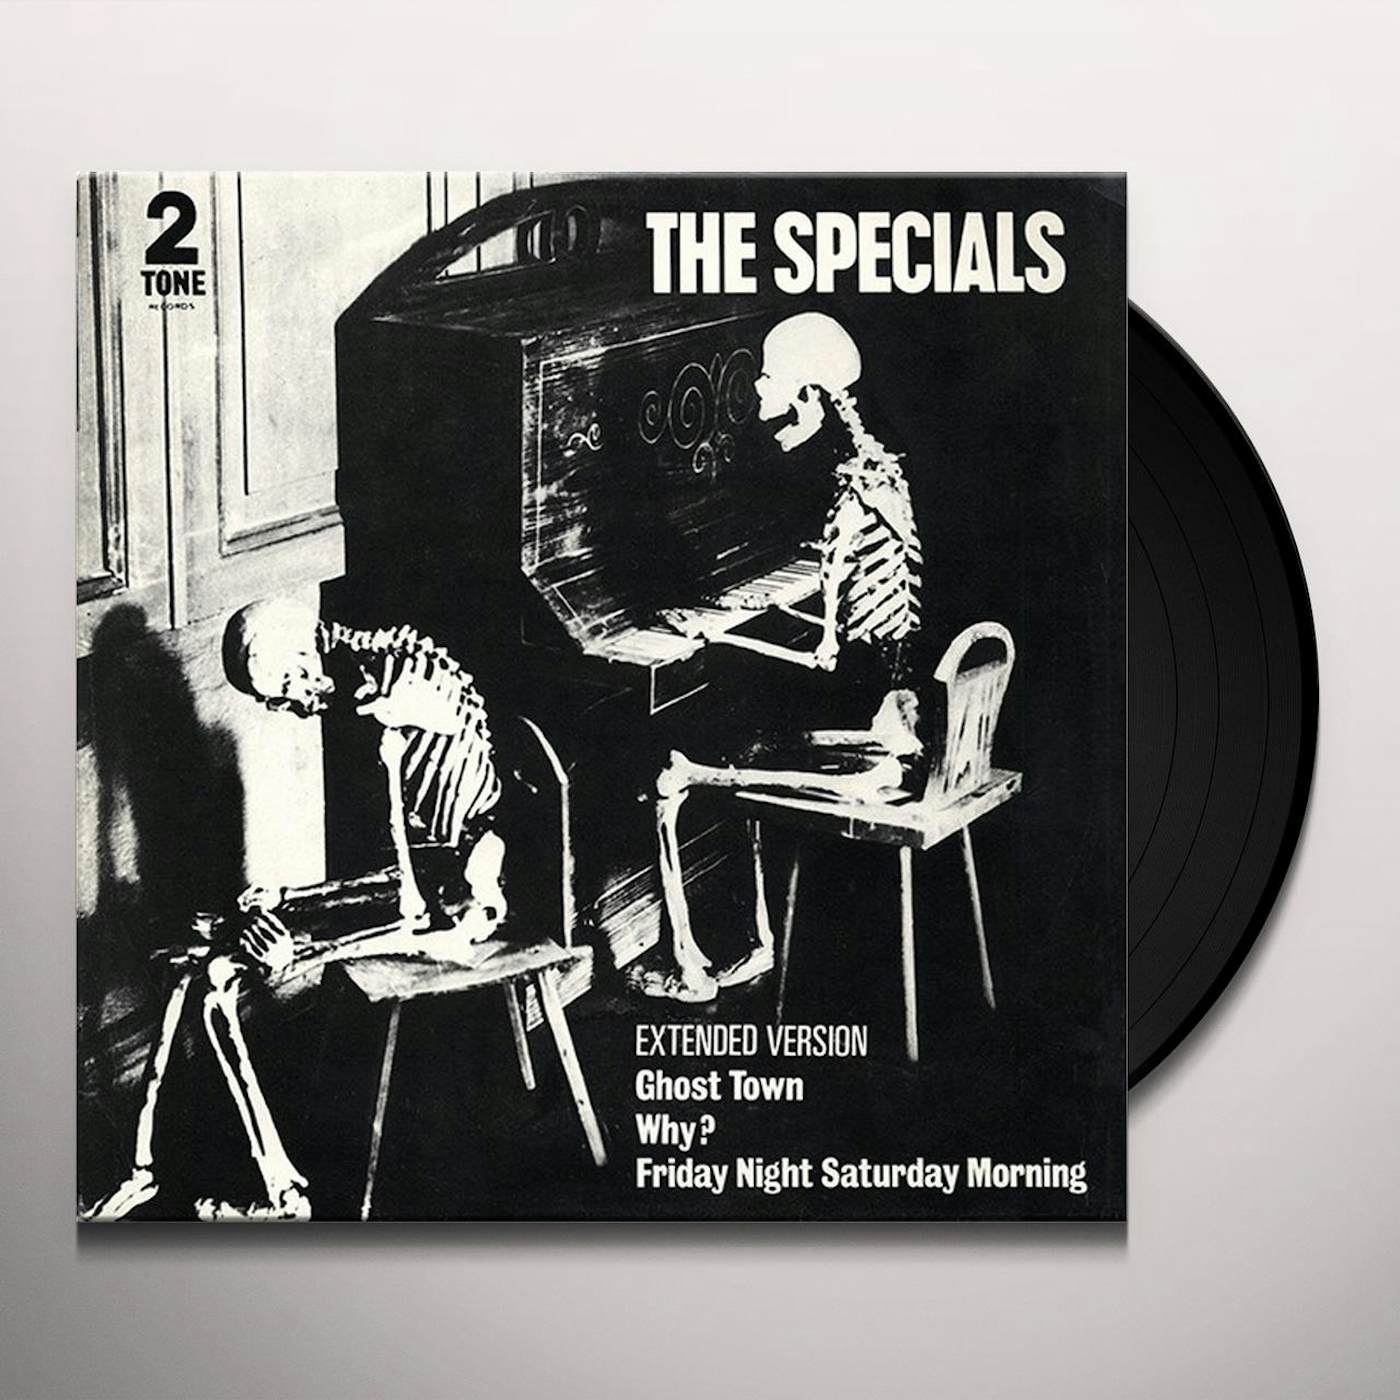 The Specials GHOST TOWN Vinyl Record